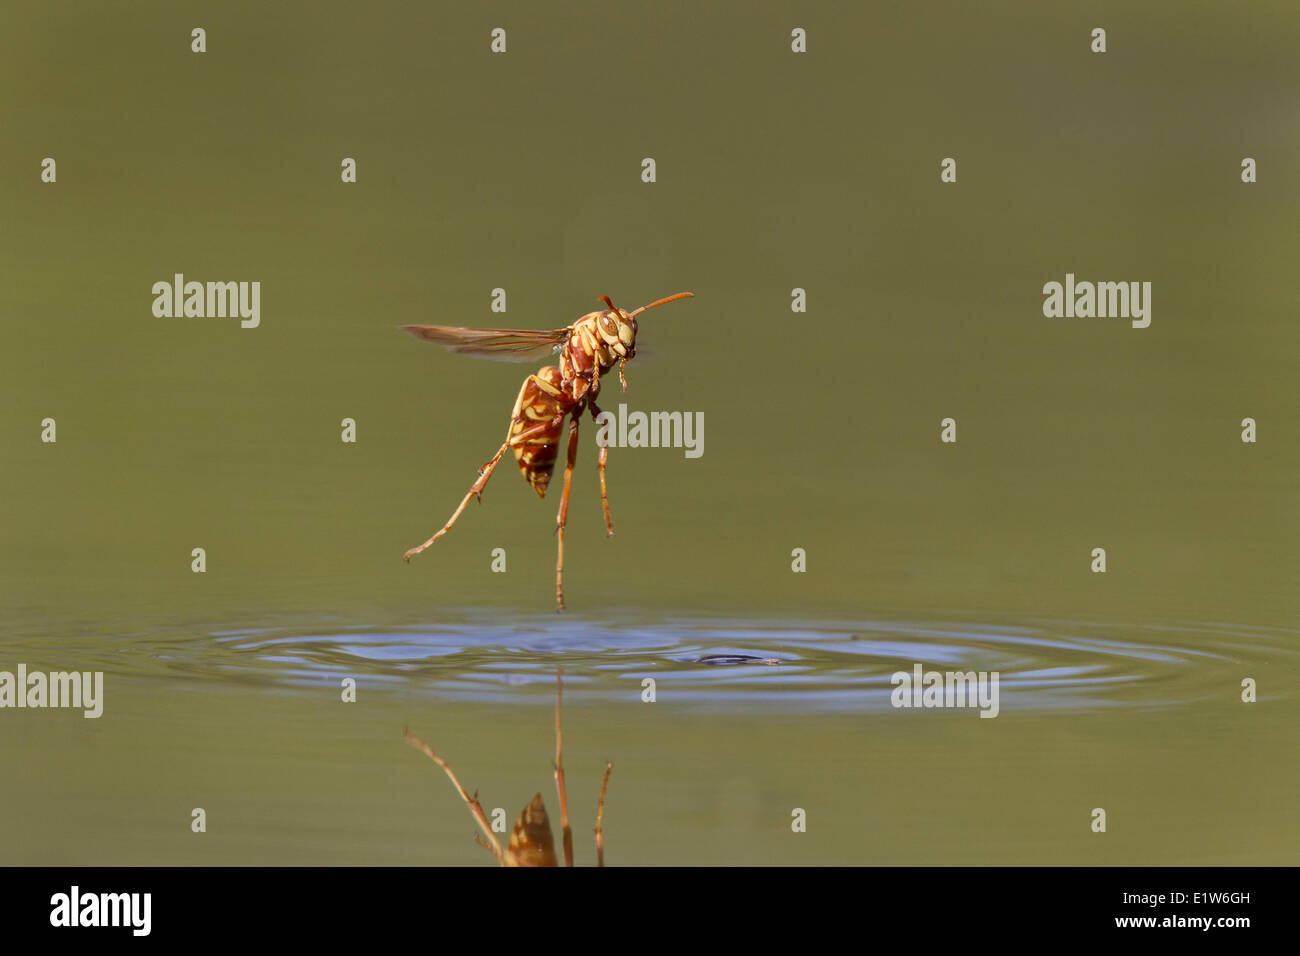 Paper wasp (Polistes sp.), taking off from surface of pond after drinking water, Laguna Seca Ranch, near Edinburg, South Texas. Stock Photo